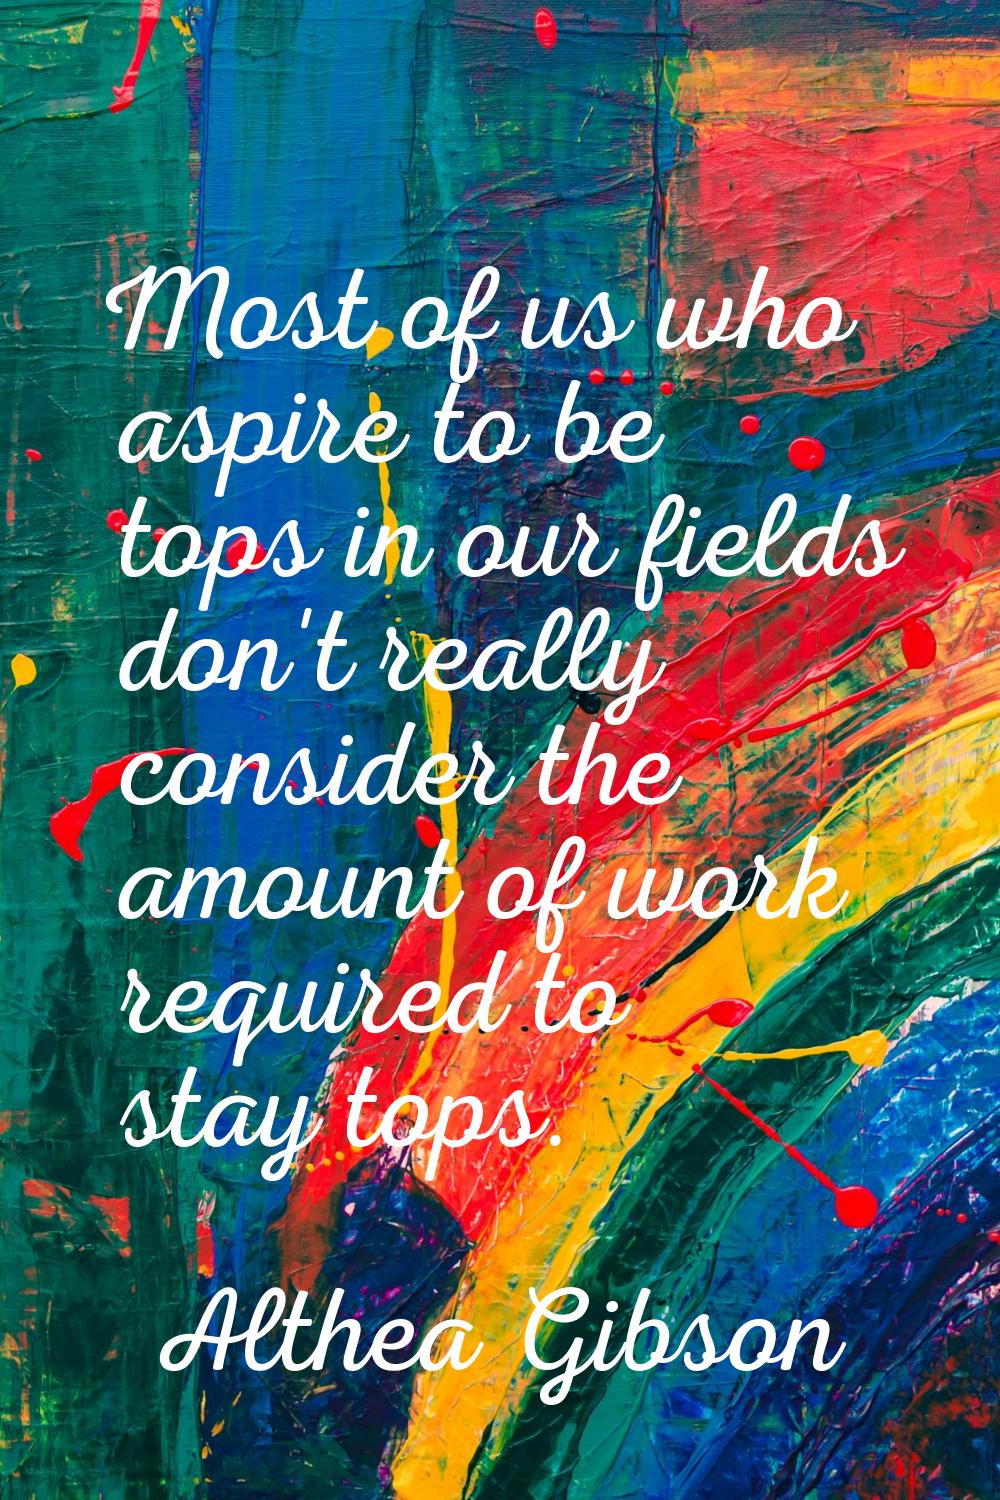 Most of us who aspire to be tops in our fields don't really consider the amount of work required to